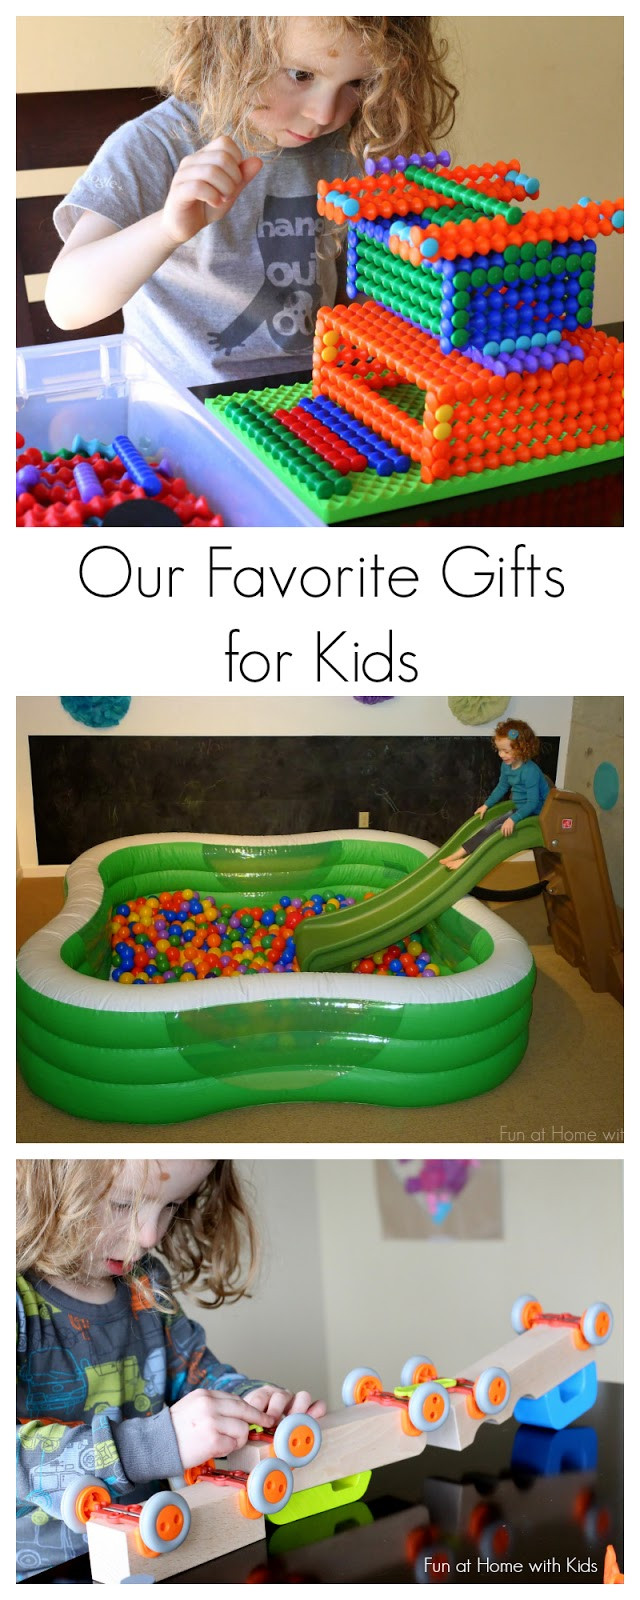 Unique Christmas Gift For Kids
 Our 10 Best and Favorite Gift Ideas for Kids